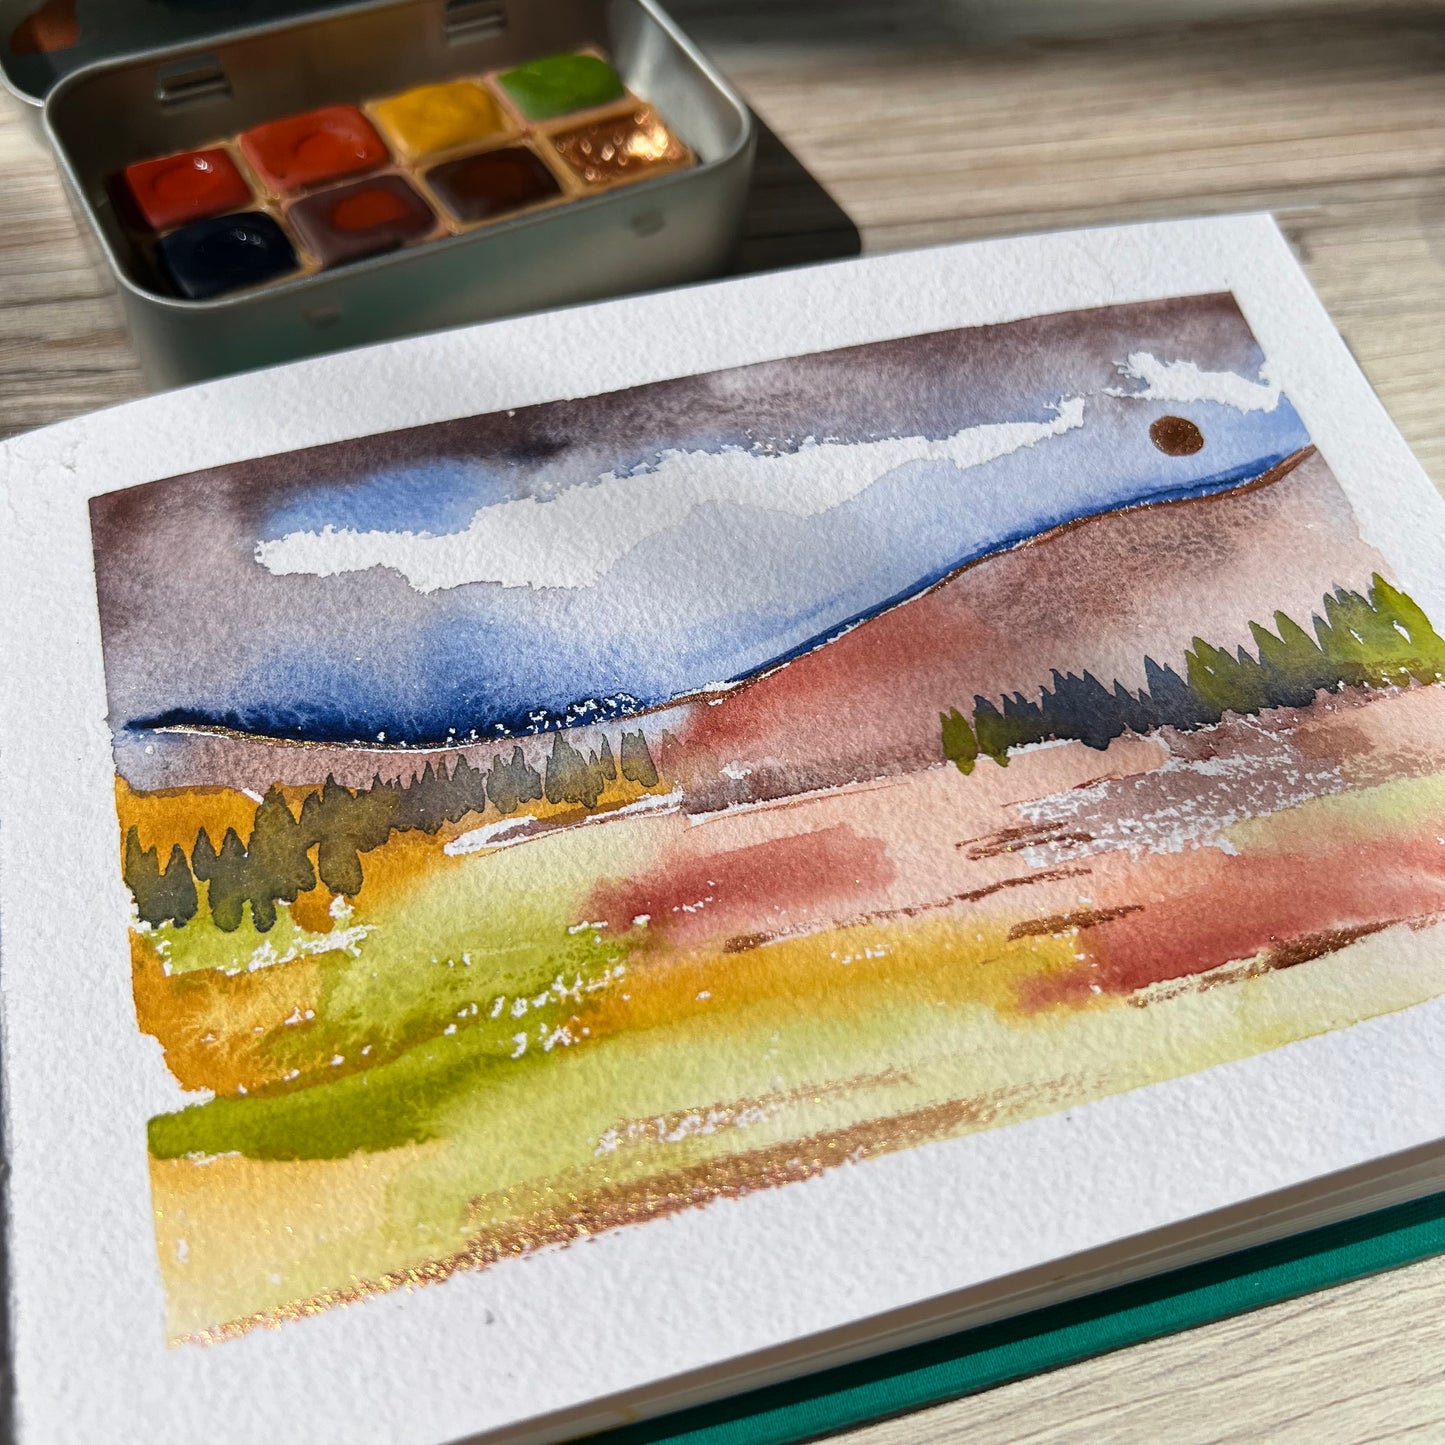 In the Autumn Woods Half Pan Palette, a handmade watercolor painting set